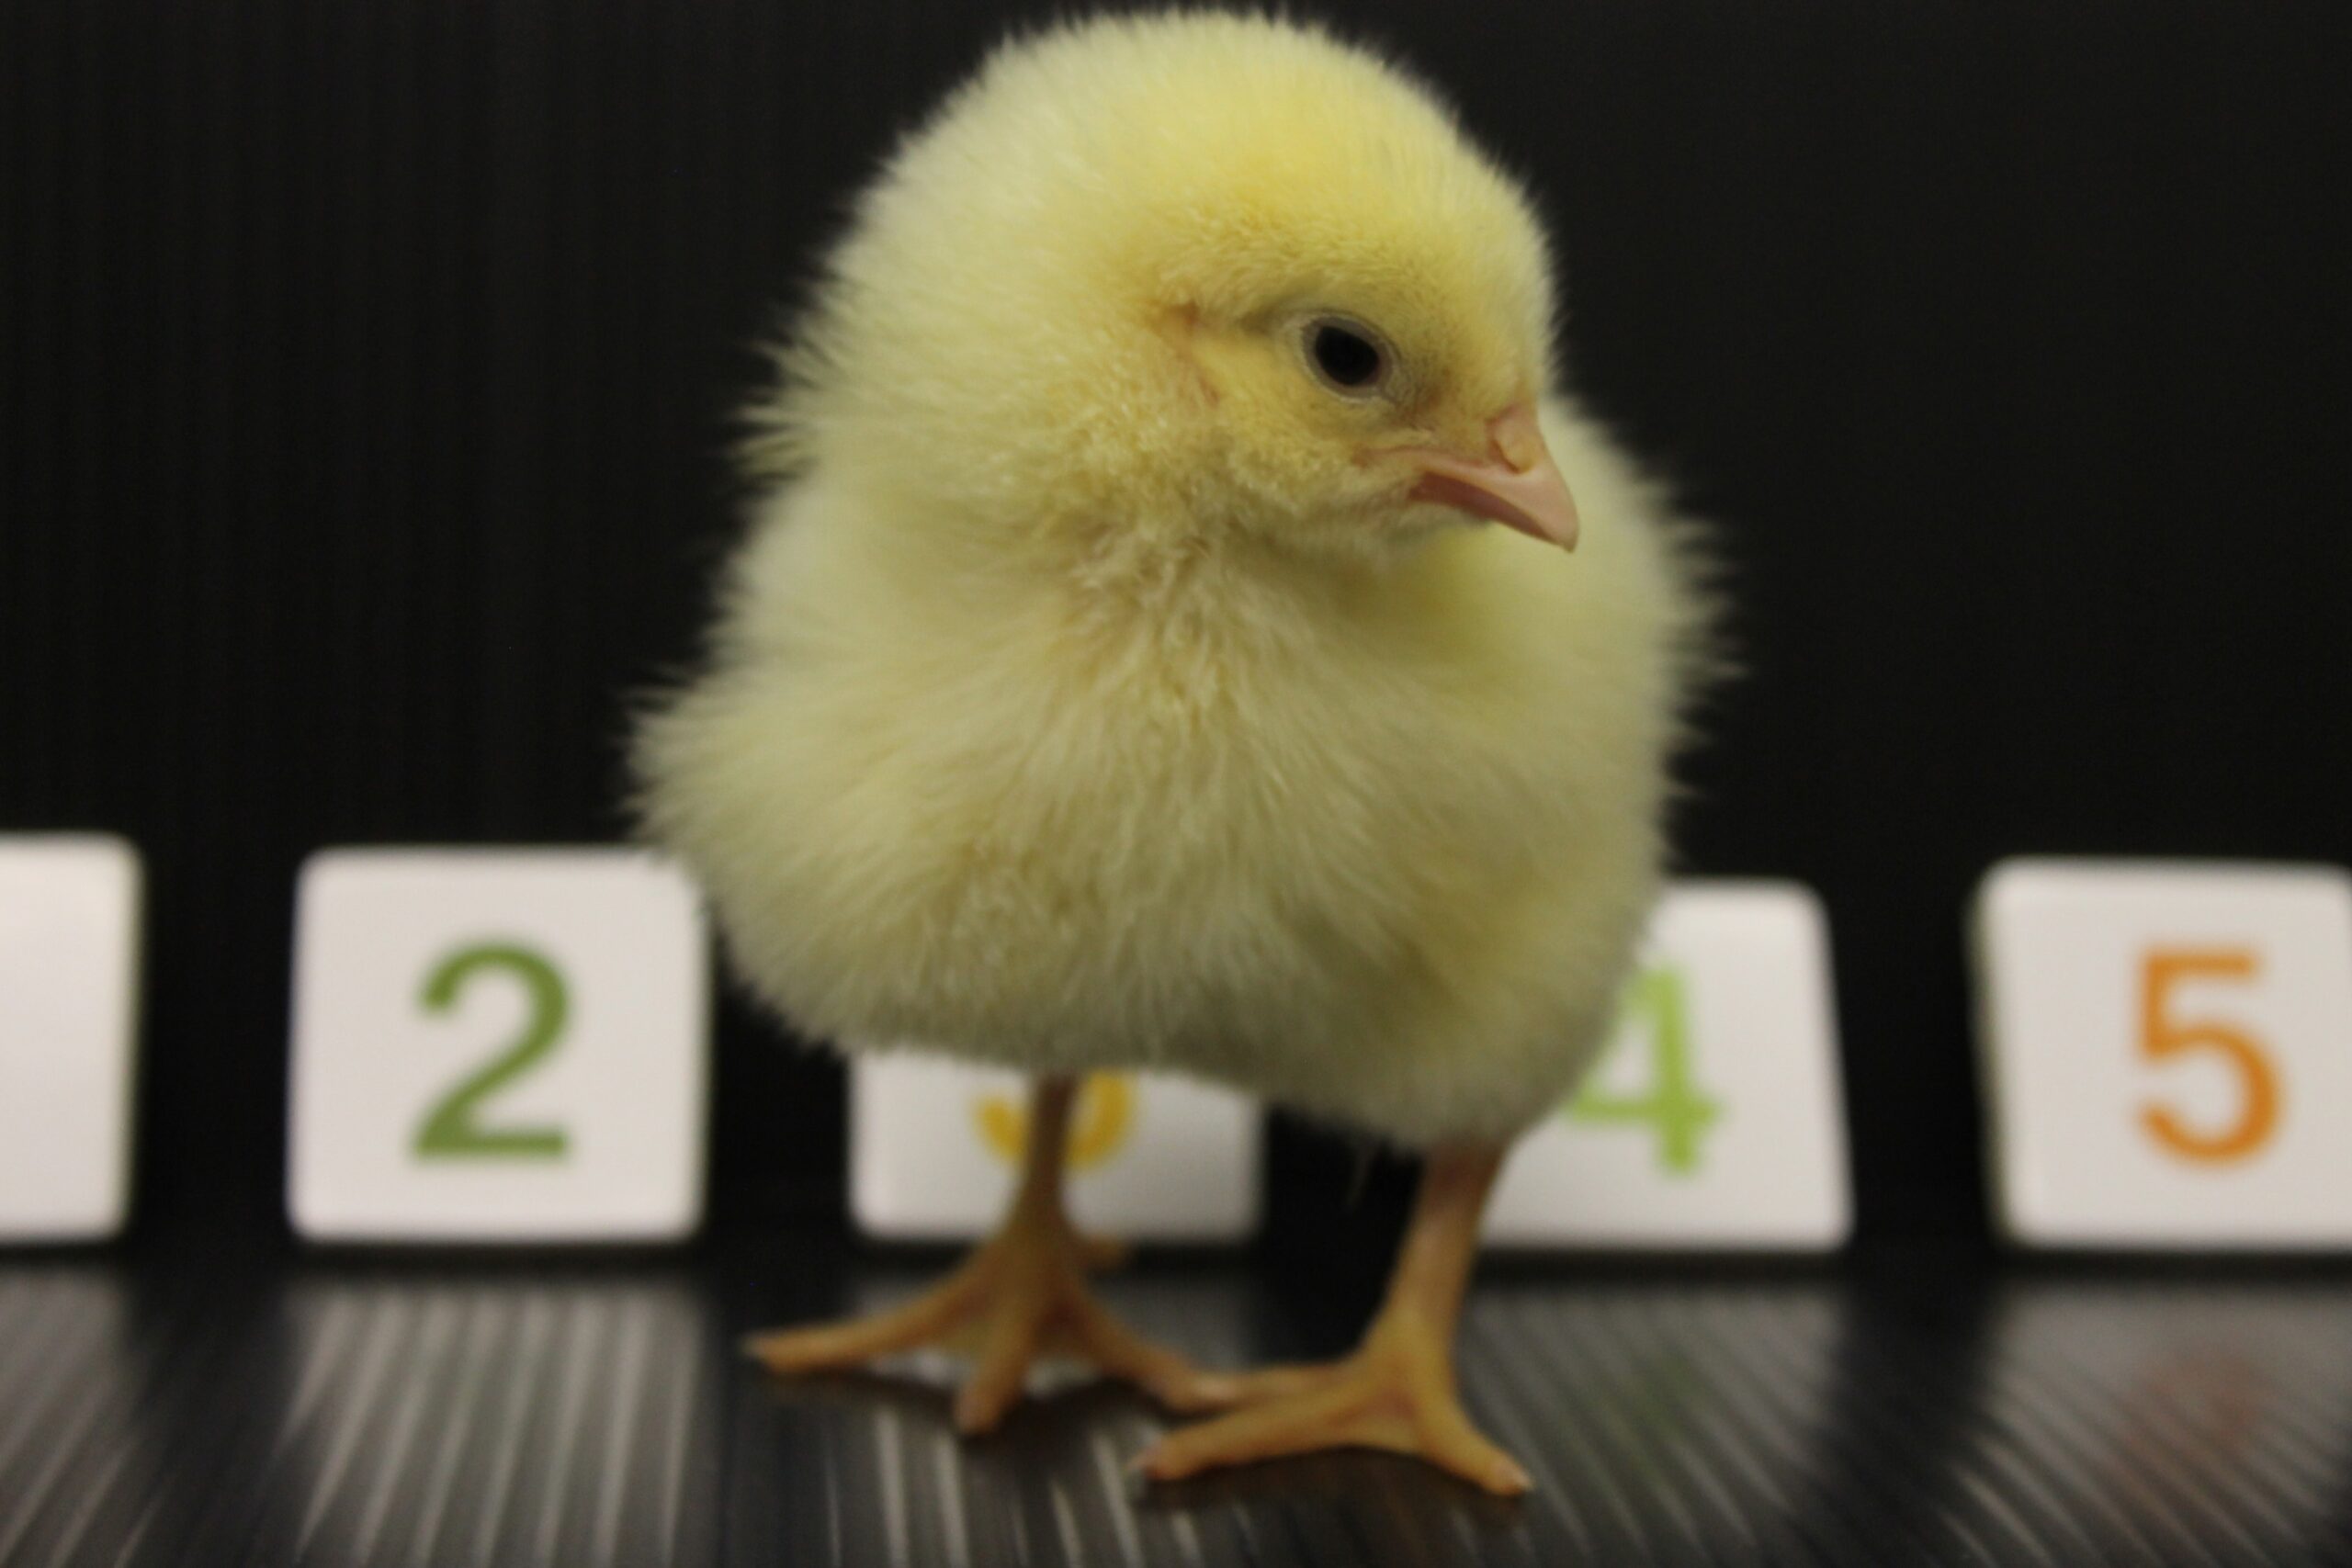 New Evidence That Baby Chicks Have Mental Number Lines Like Humans Do